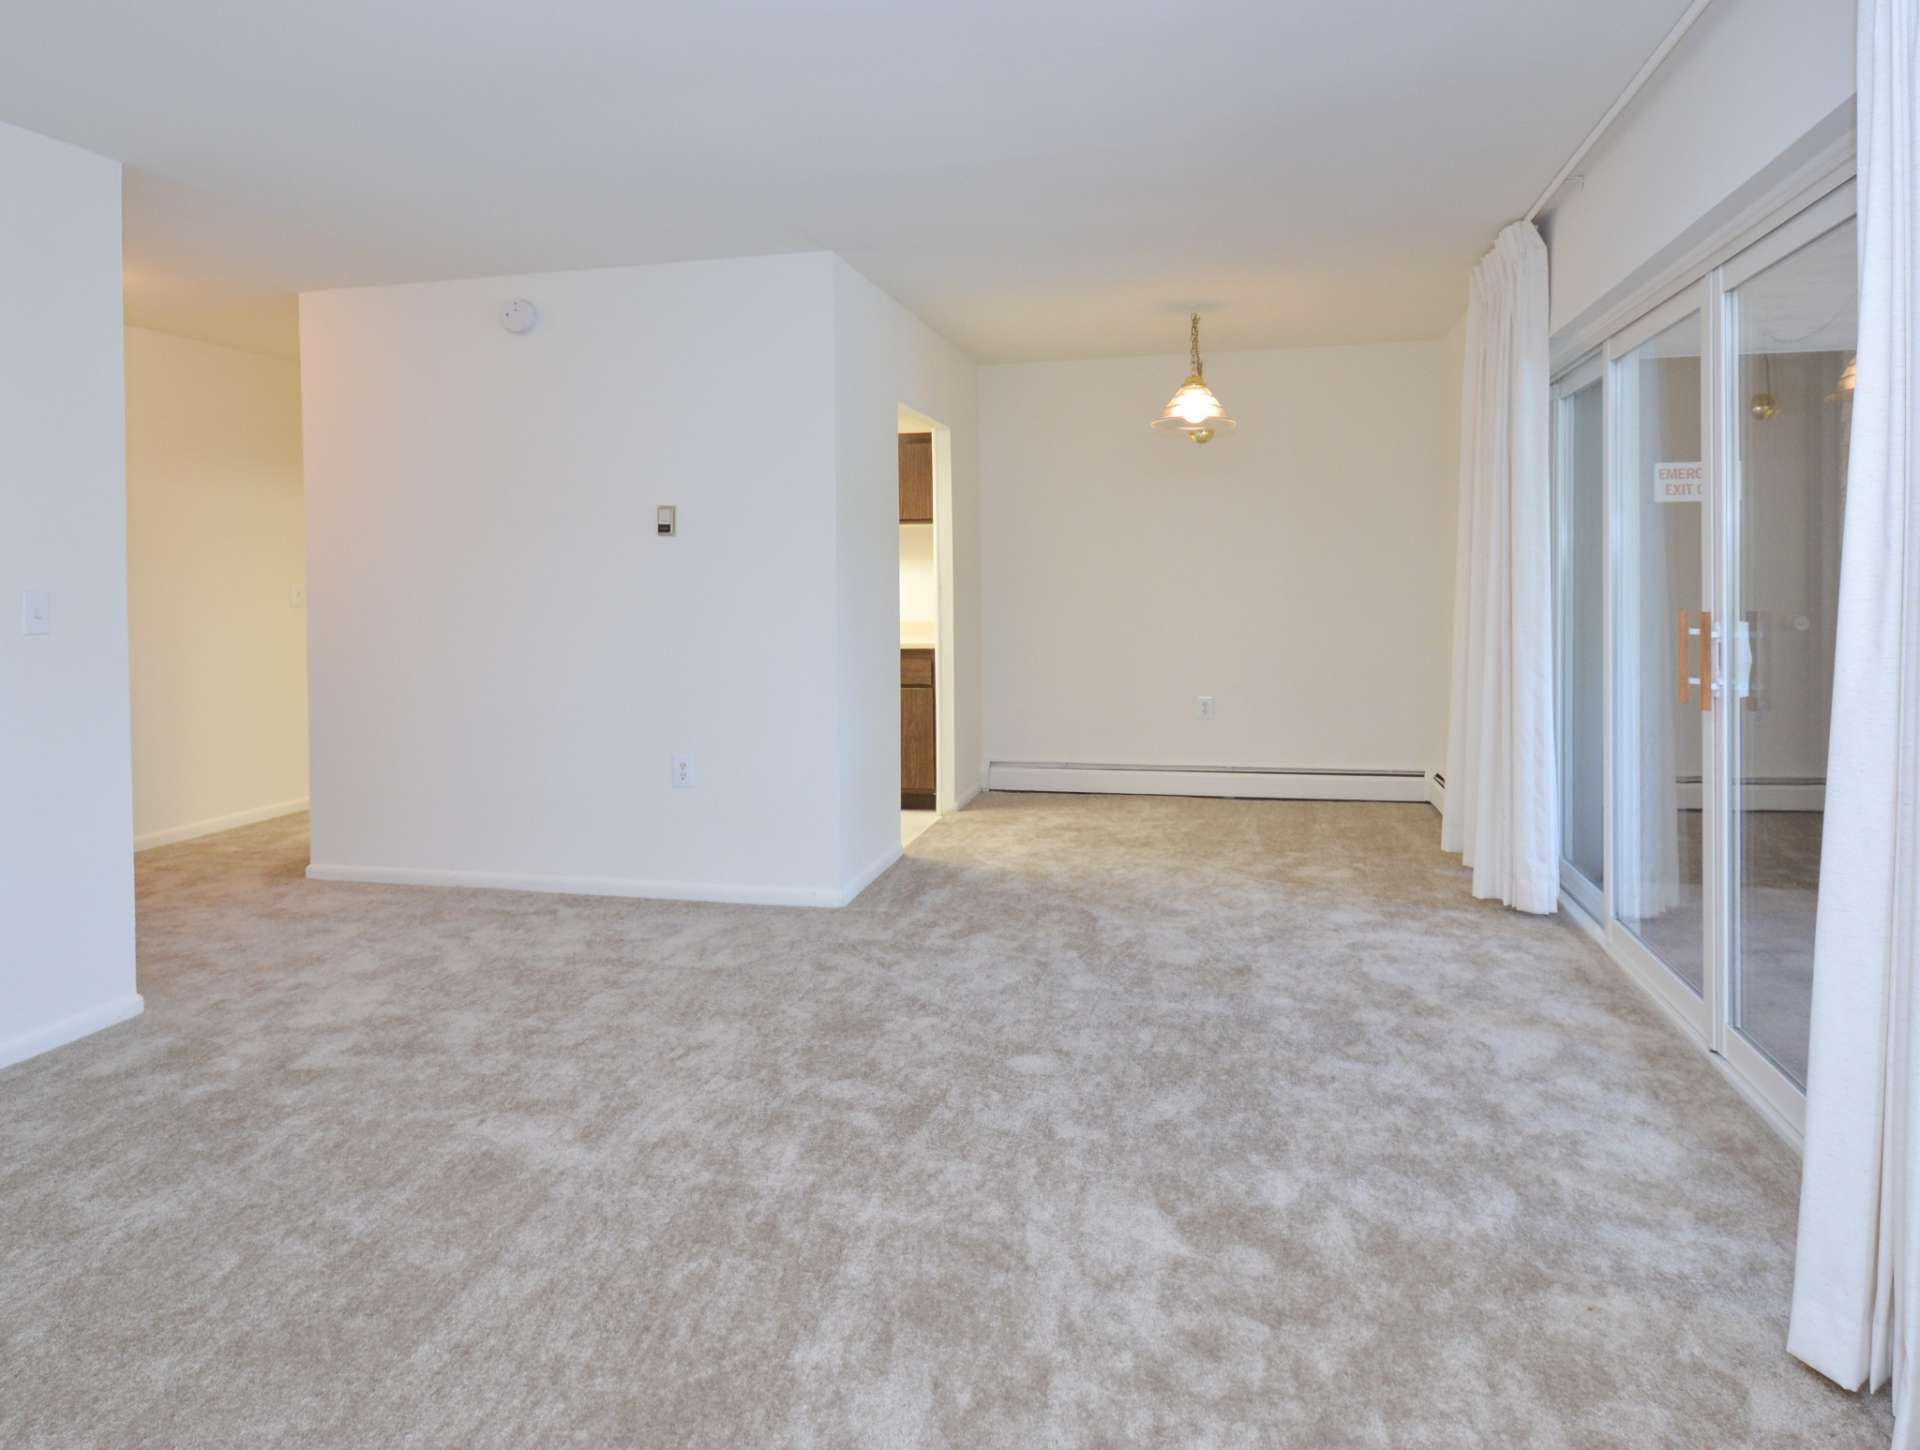 Spacious living room area with white carpets and sliding glass doors to the balcony.